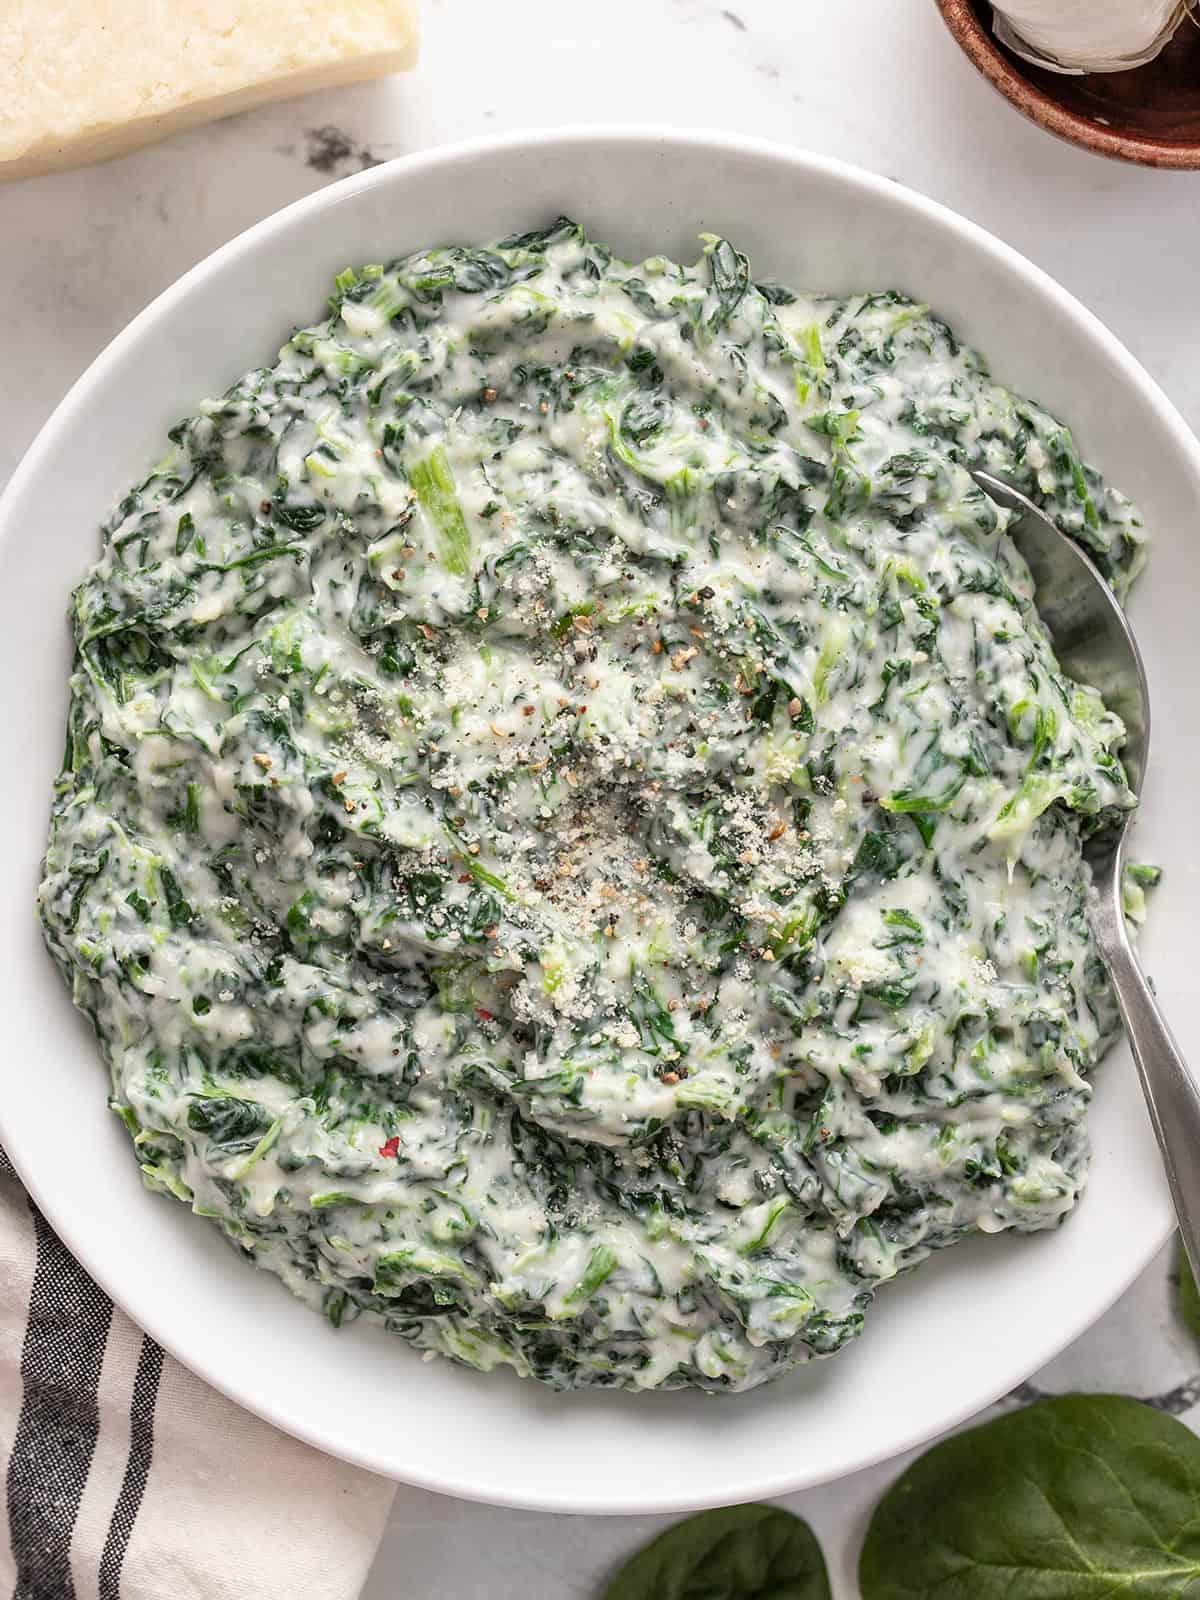 Overhead view of a bowl full of creamed spinach.